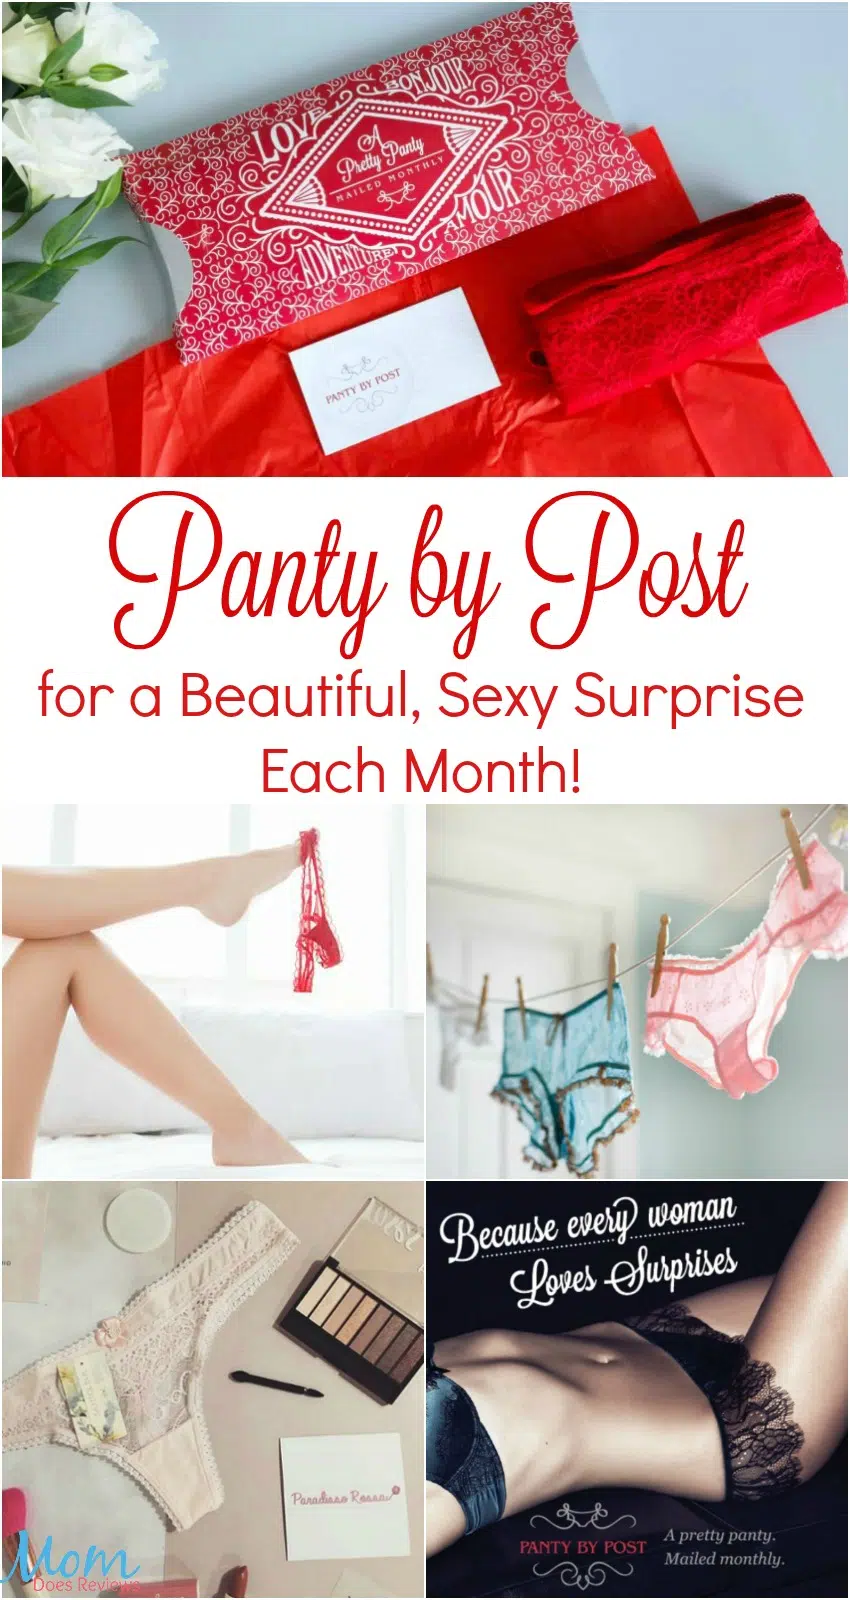 Panty by Post for a Beautiful, Sexy Surprise Each Month!